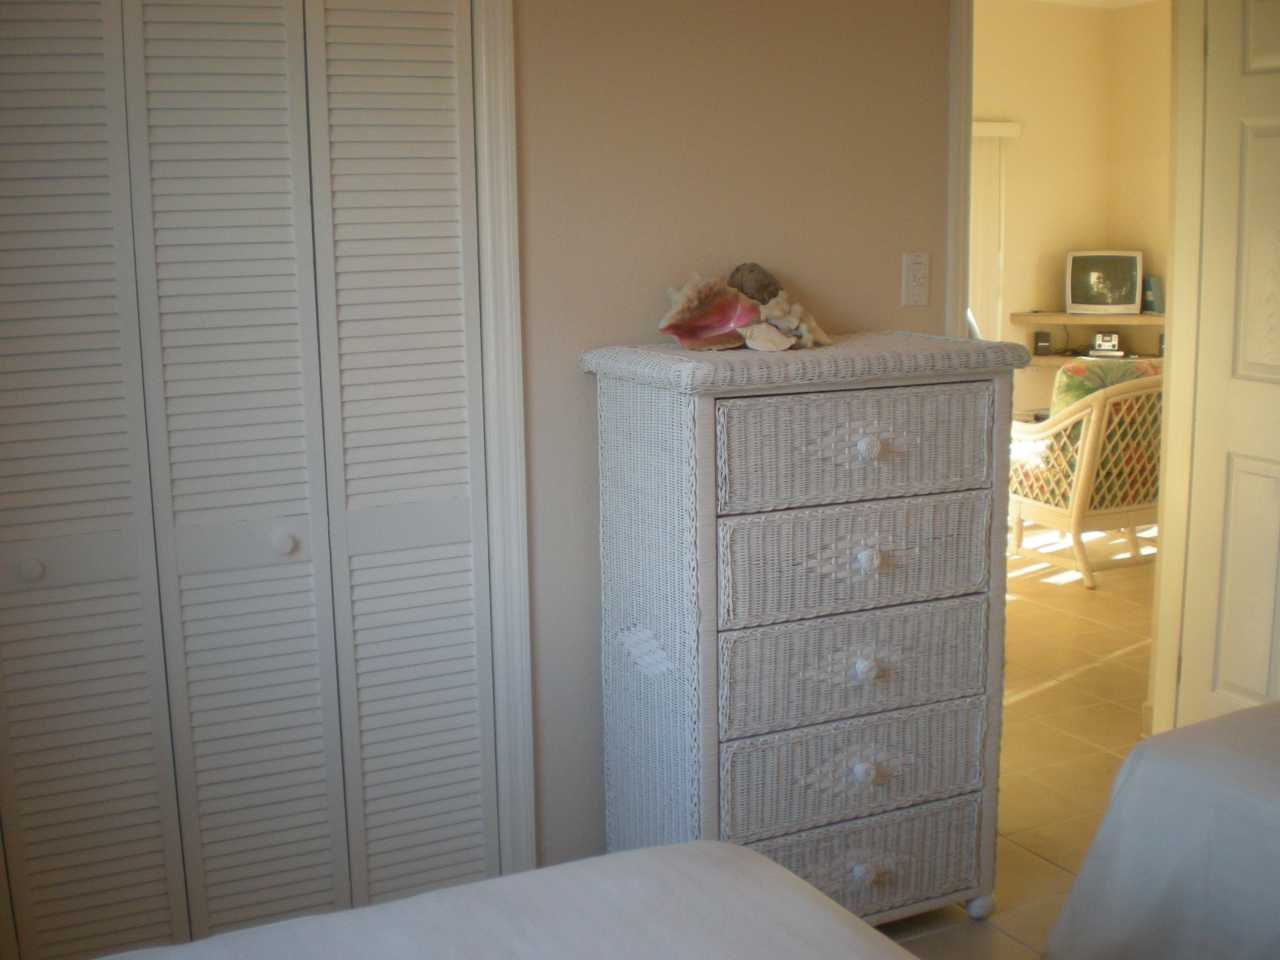 Chest of drawers and closet in second bedroom